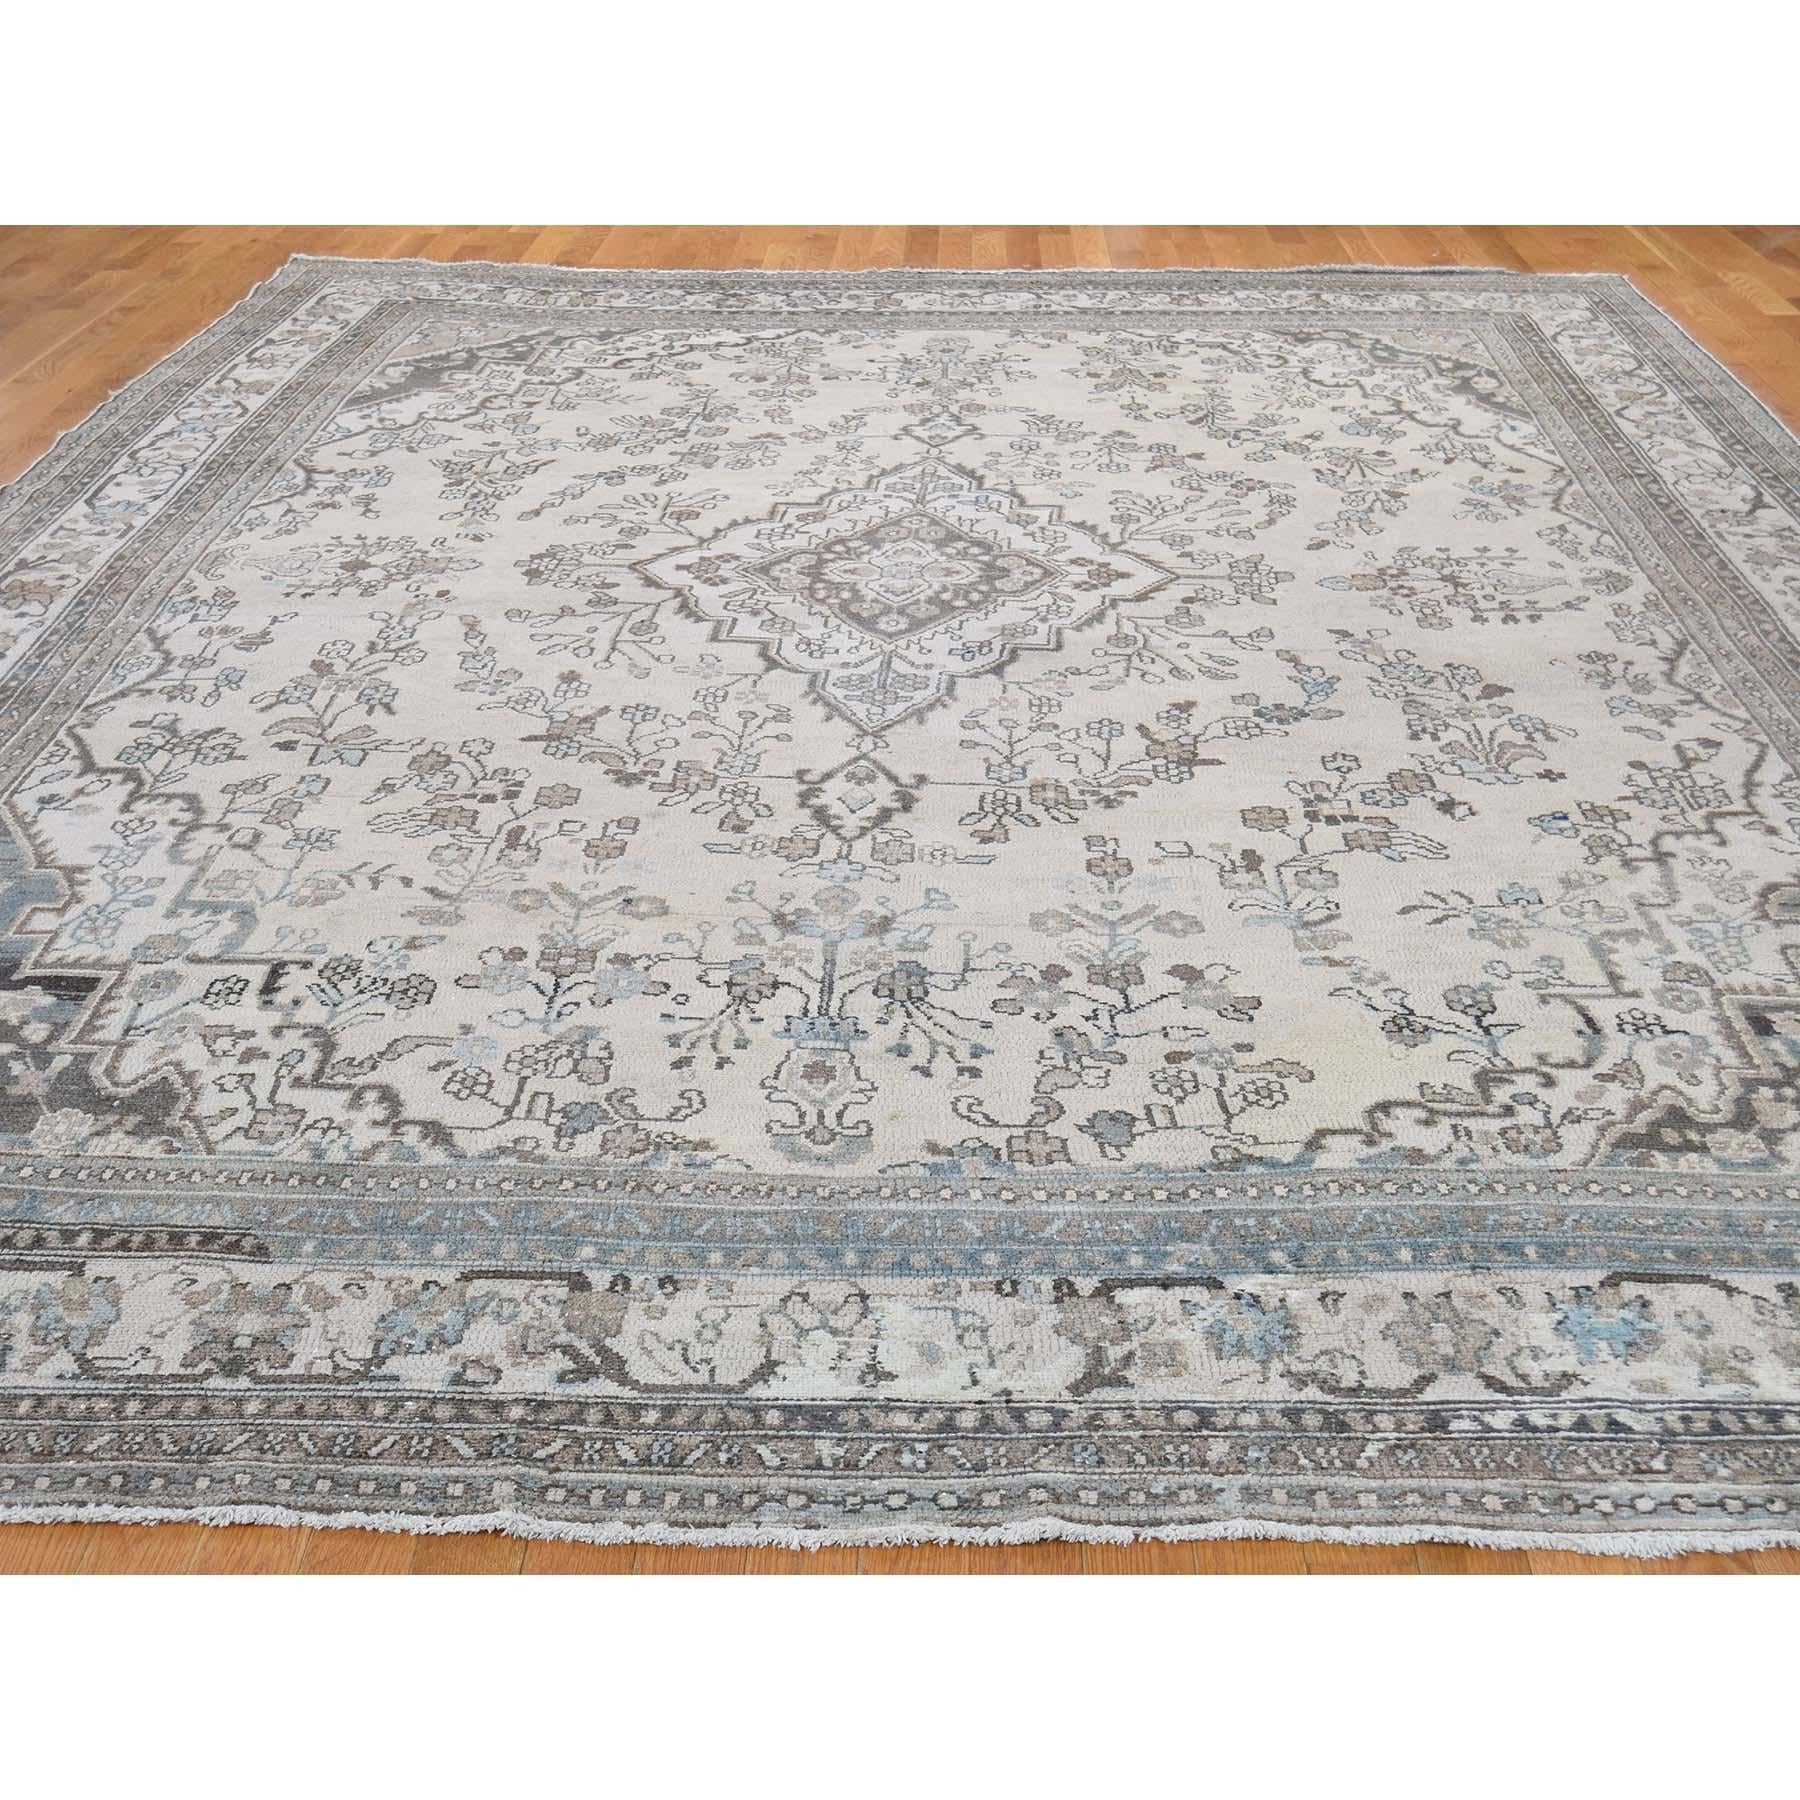 Other Vintage Hamadan with Grey and Blue Hand Knotted Oriental Rug